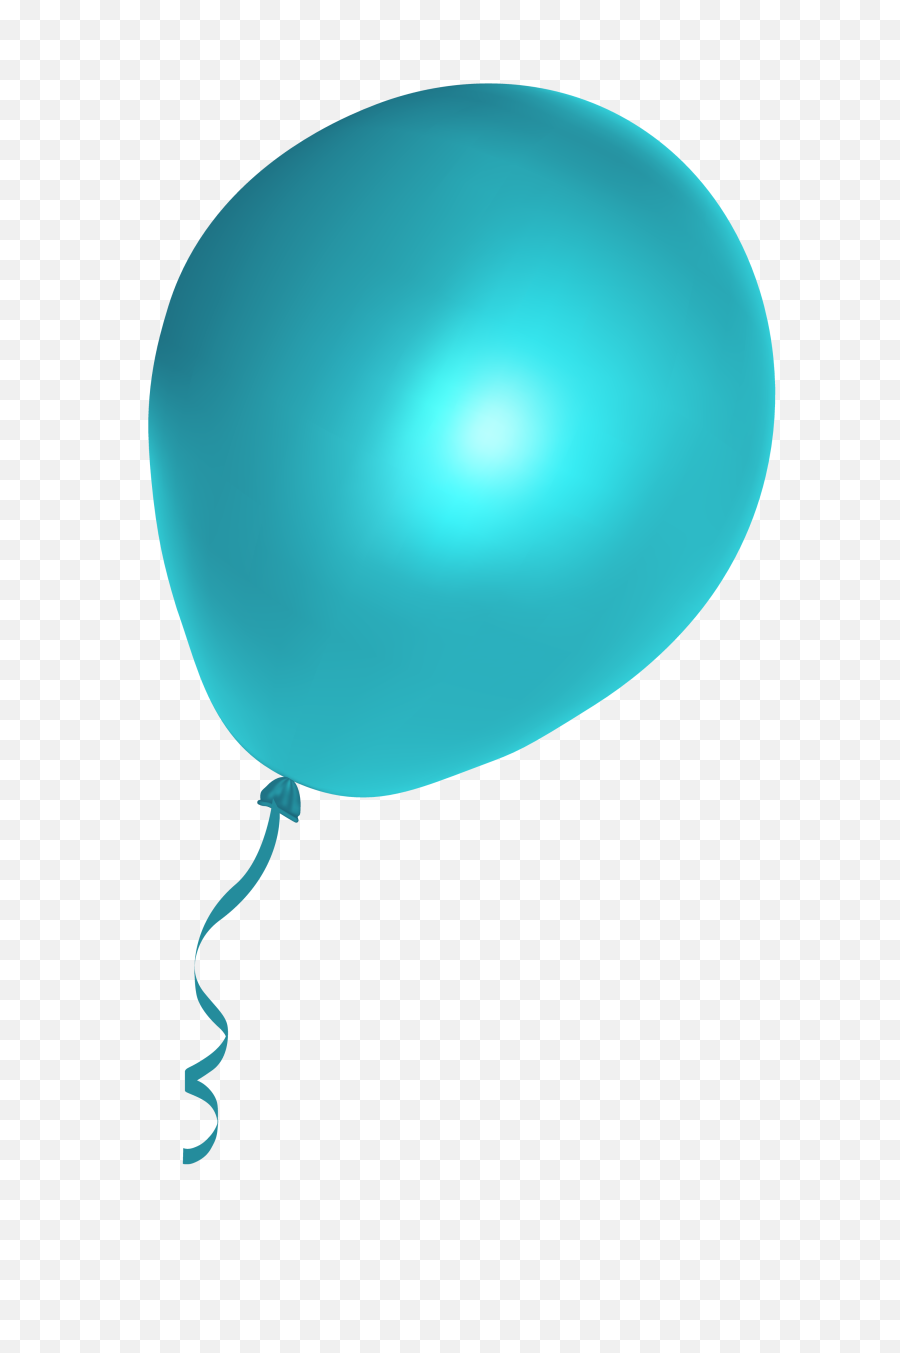 Download Balloons Free Png Transparent - Transparent Background Teal Balloons,Balloons Transparent